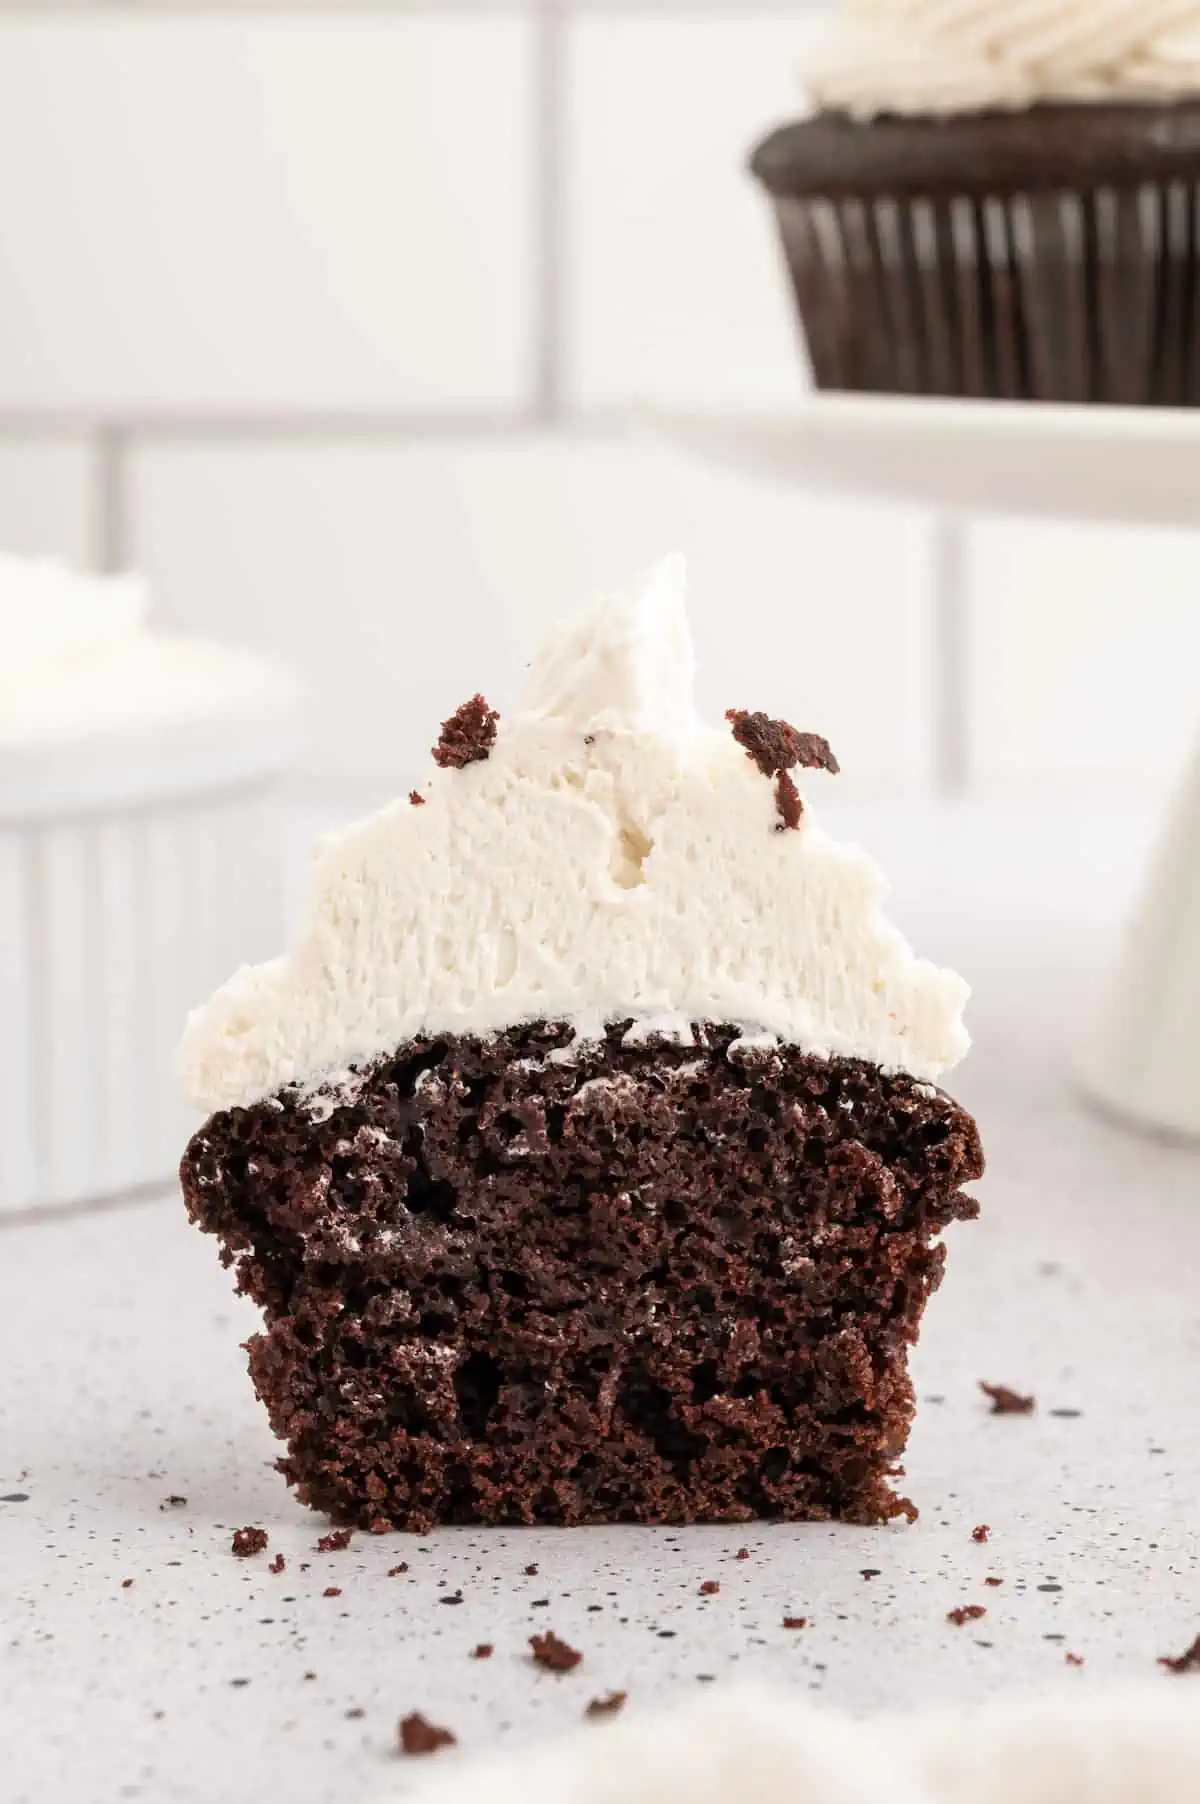 Vegan chocolate cupcake with buttercream frosting sliced in half, showing the inside.